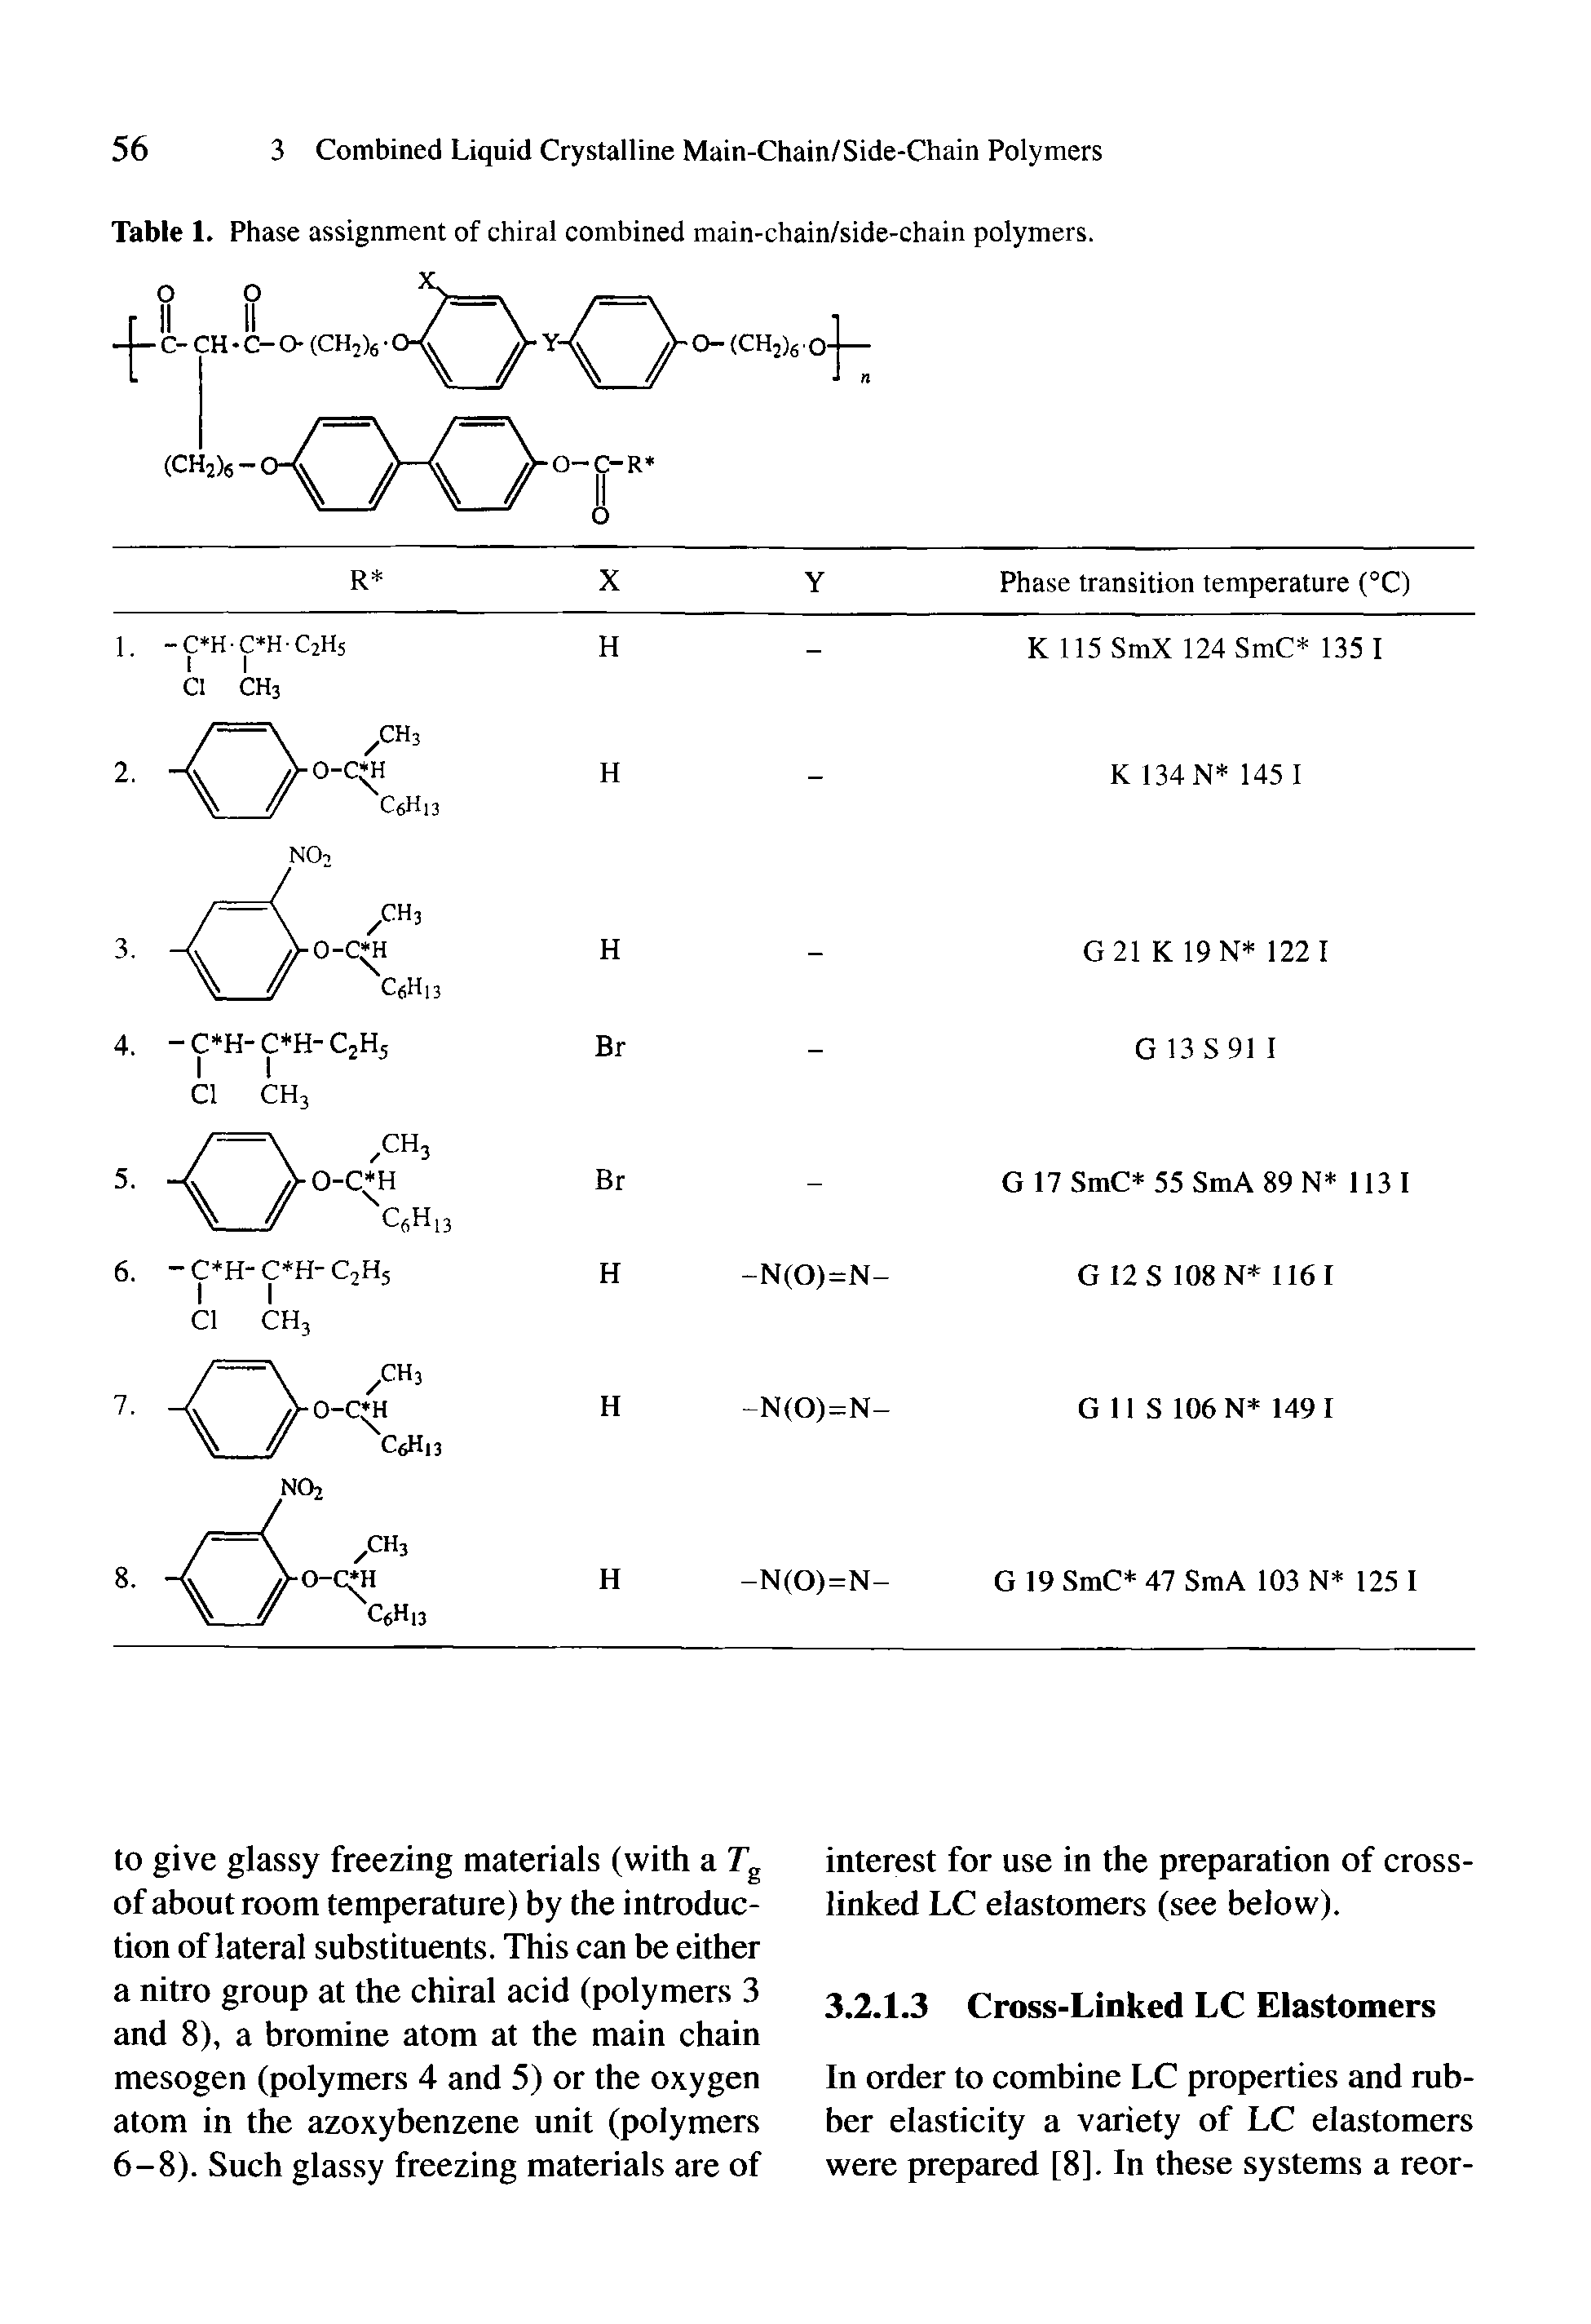 Table 1. Phase assignment of chiral combined main-chain/side-chain polymers.